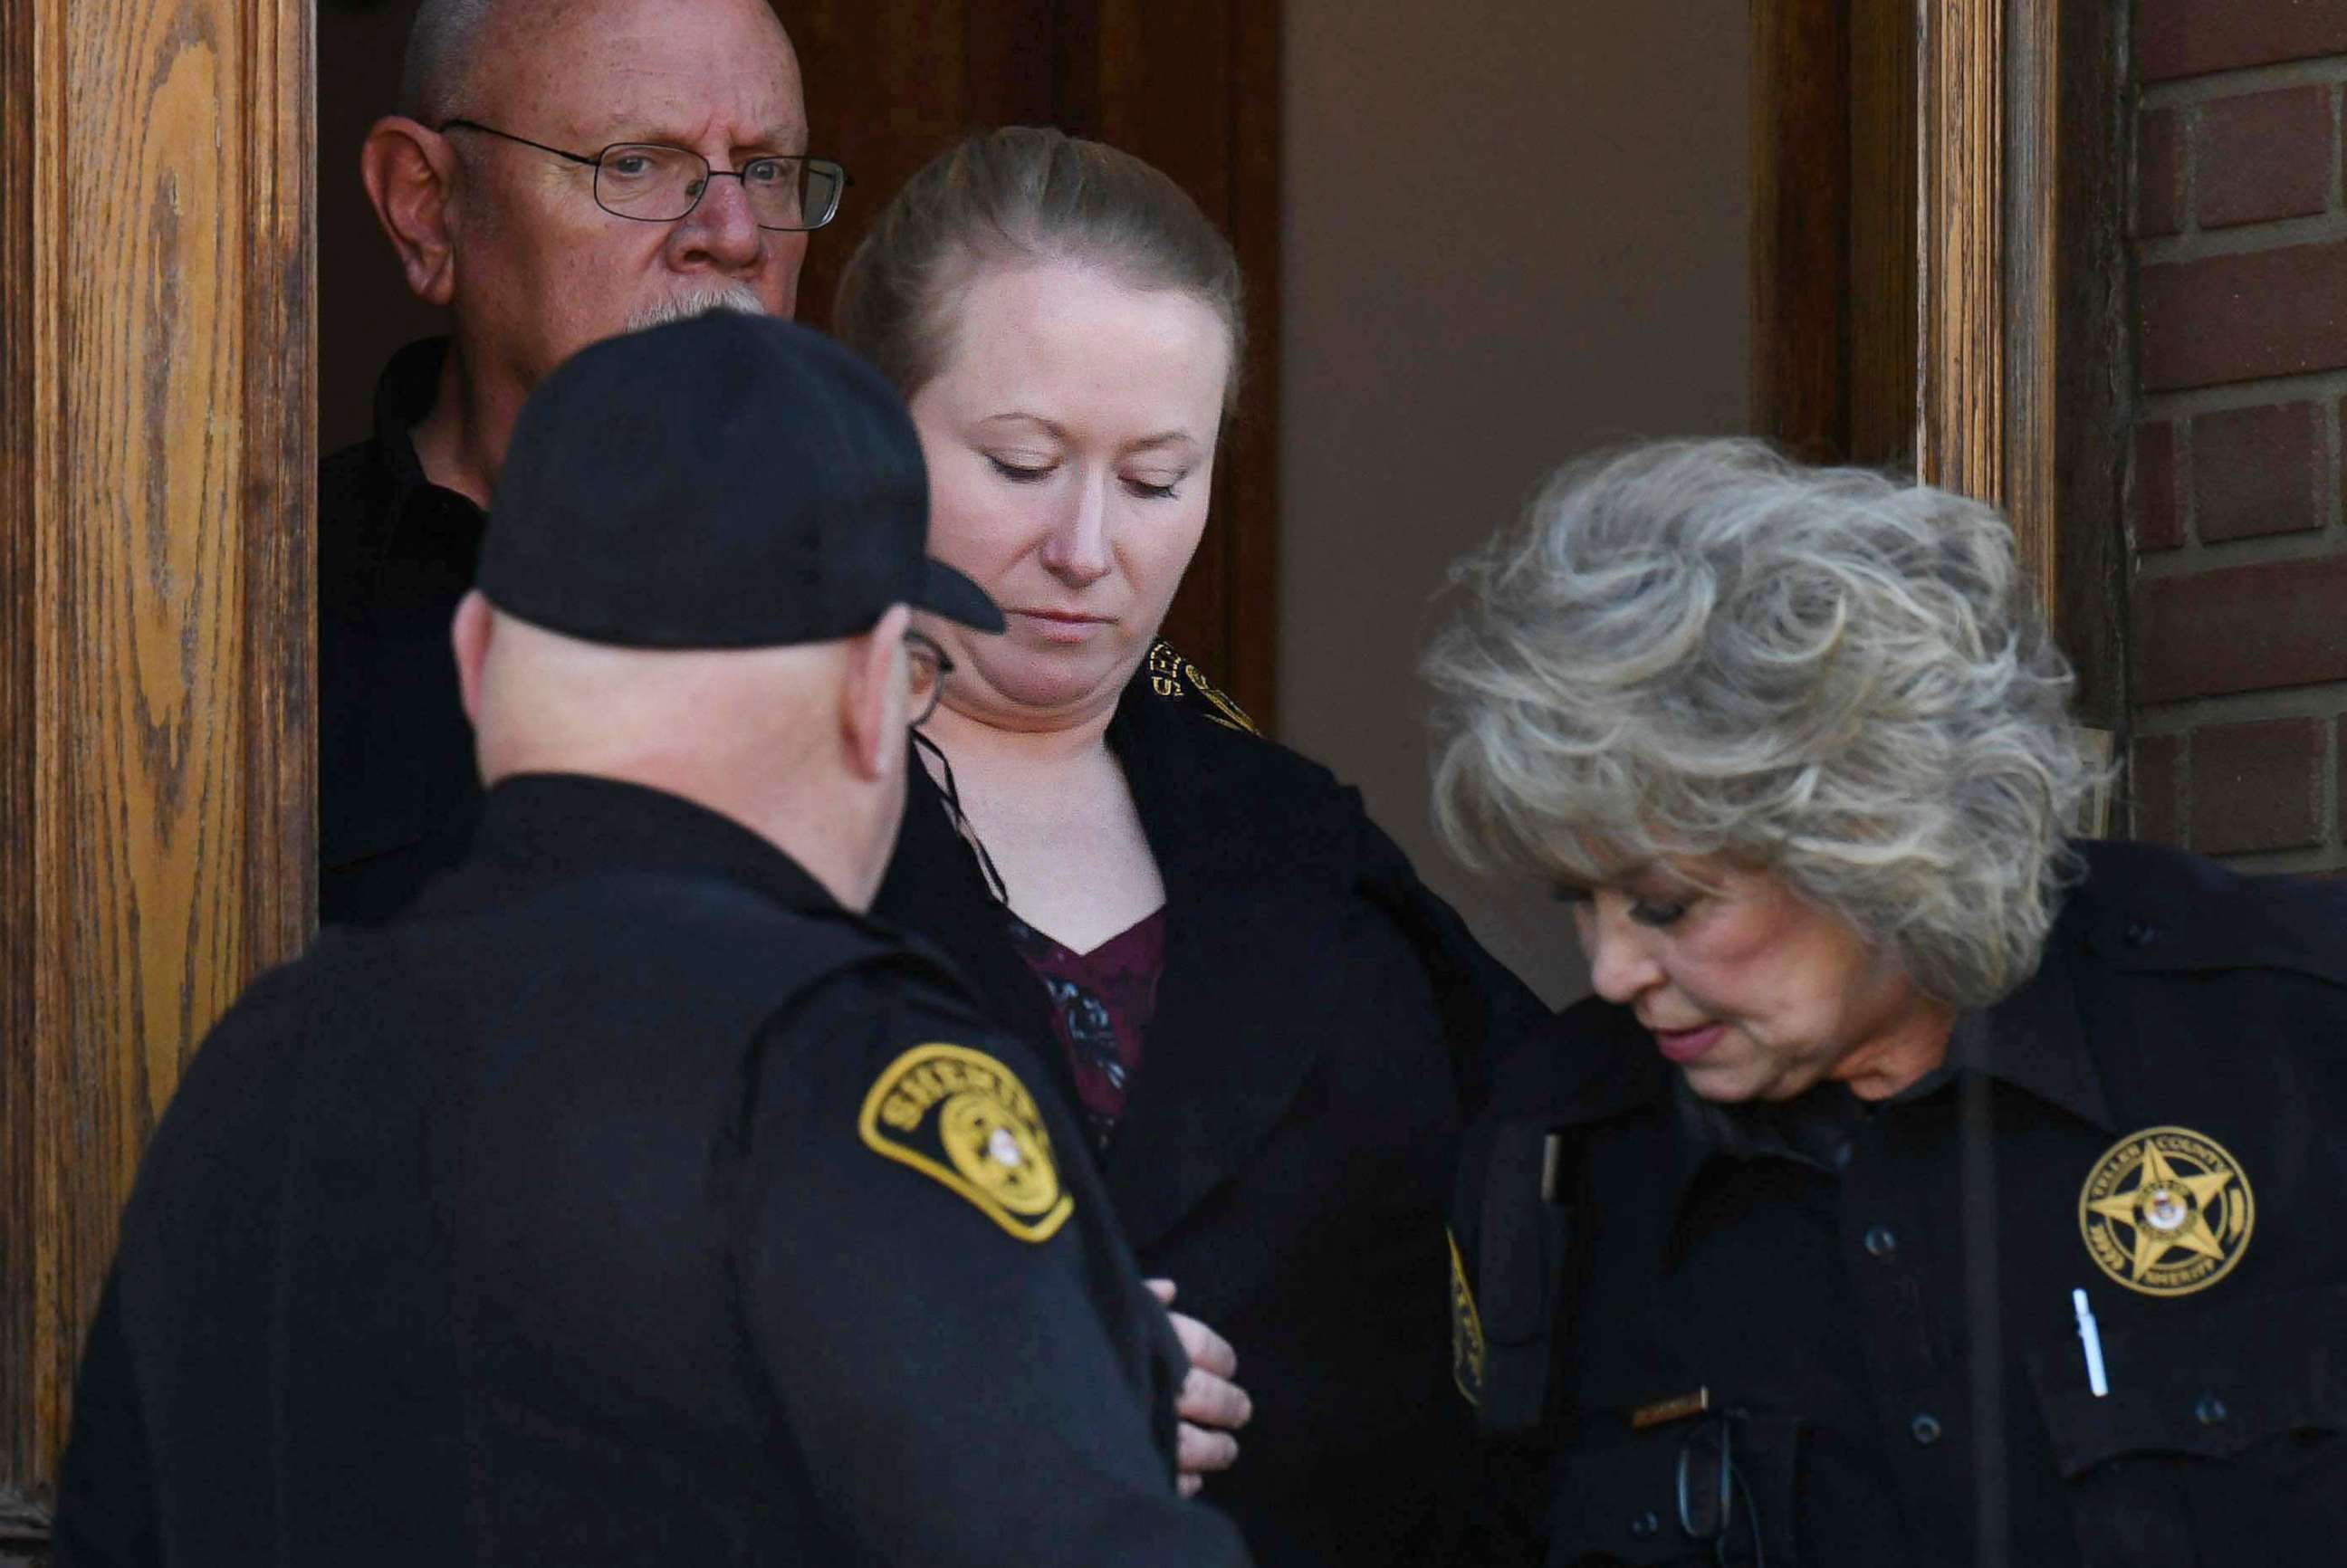 PHOTO: Krystal Lee is lead to a van by representatives of the Teller County Sheriff's Dept. after being sentenced at the Teller County Courthouse in Cripple Creek, Colo., on Jan. 28, 2020.